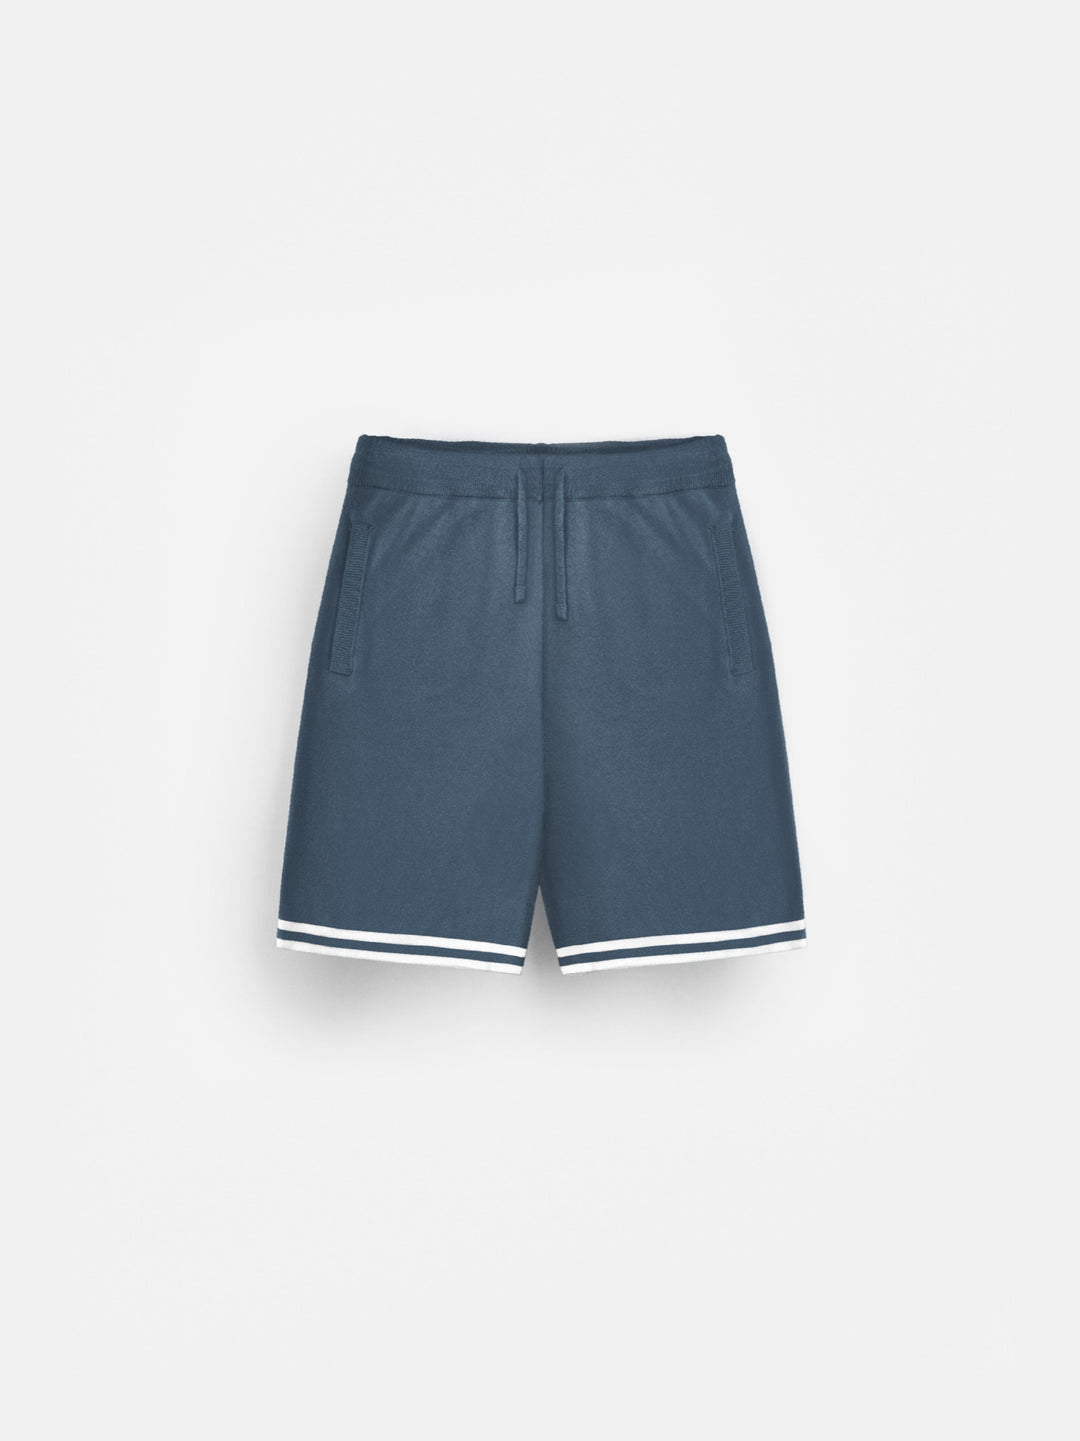 Loose Fit Knit Shorts  - Stormy Weather